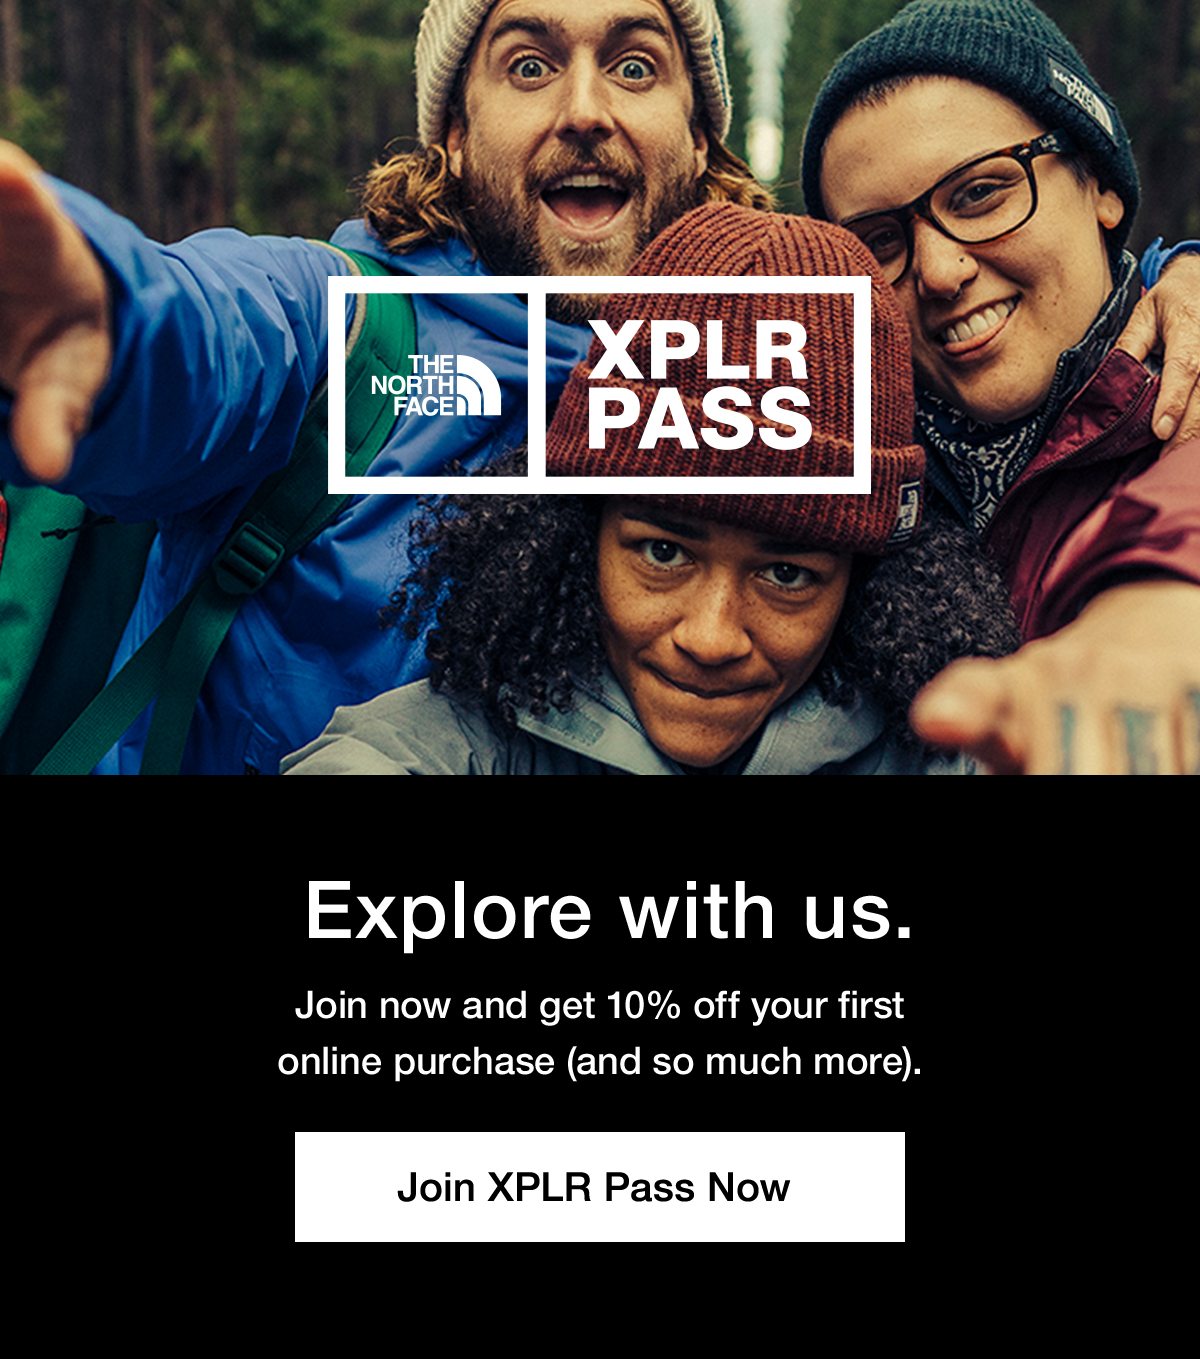 Join XPLR Pass Now